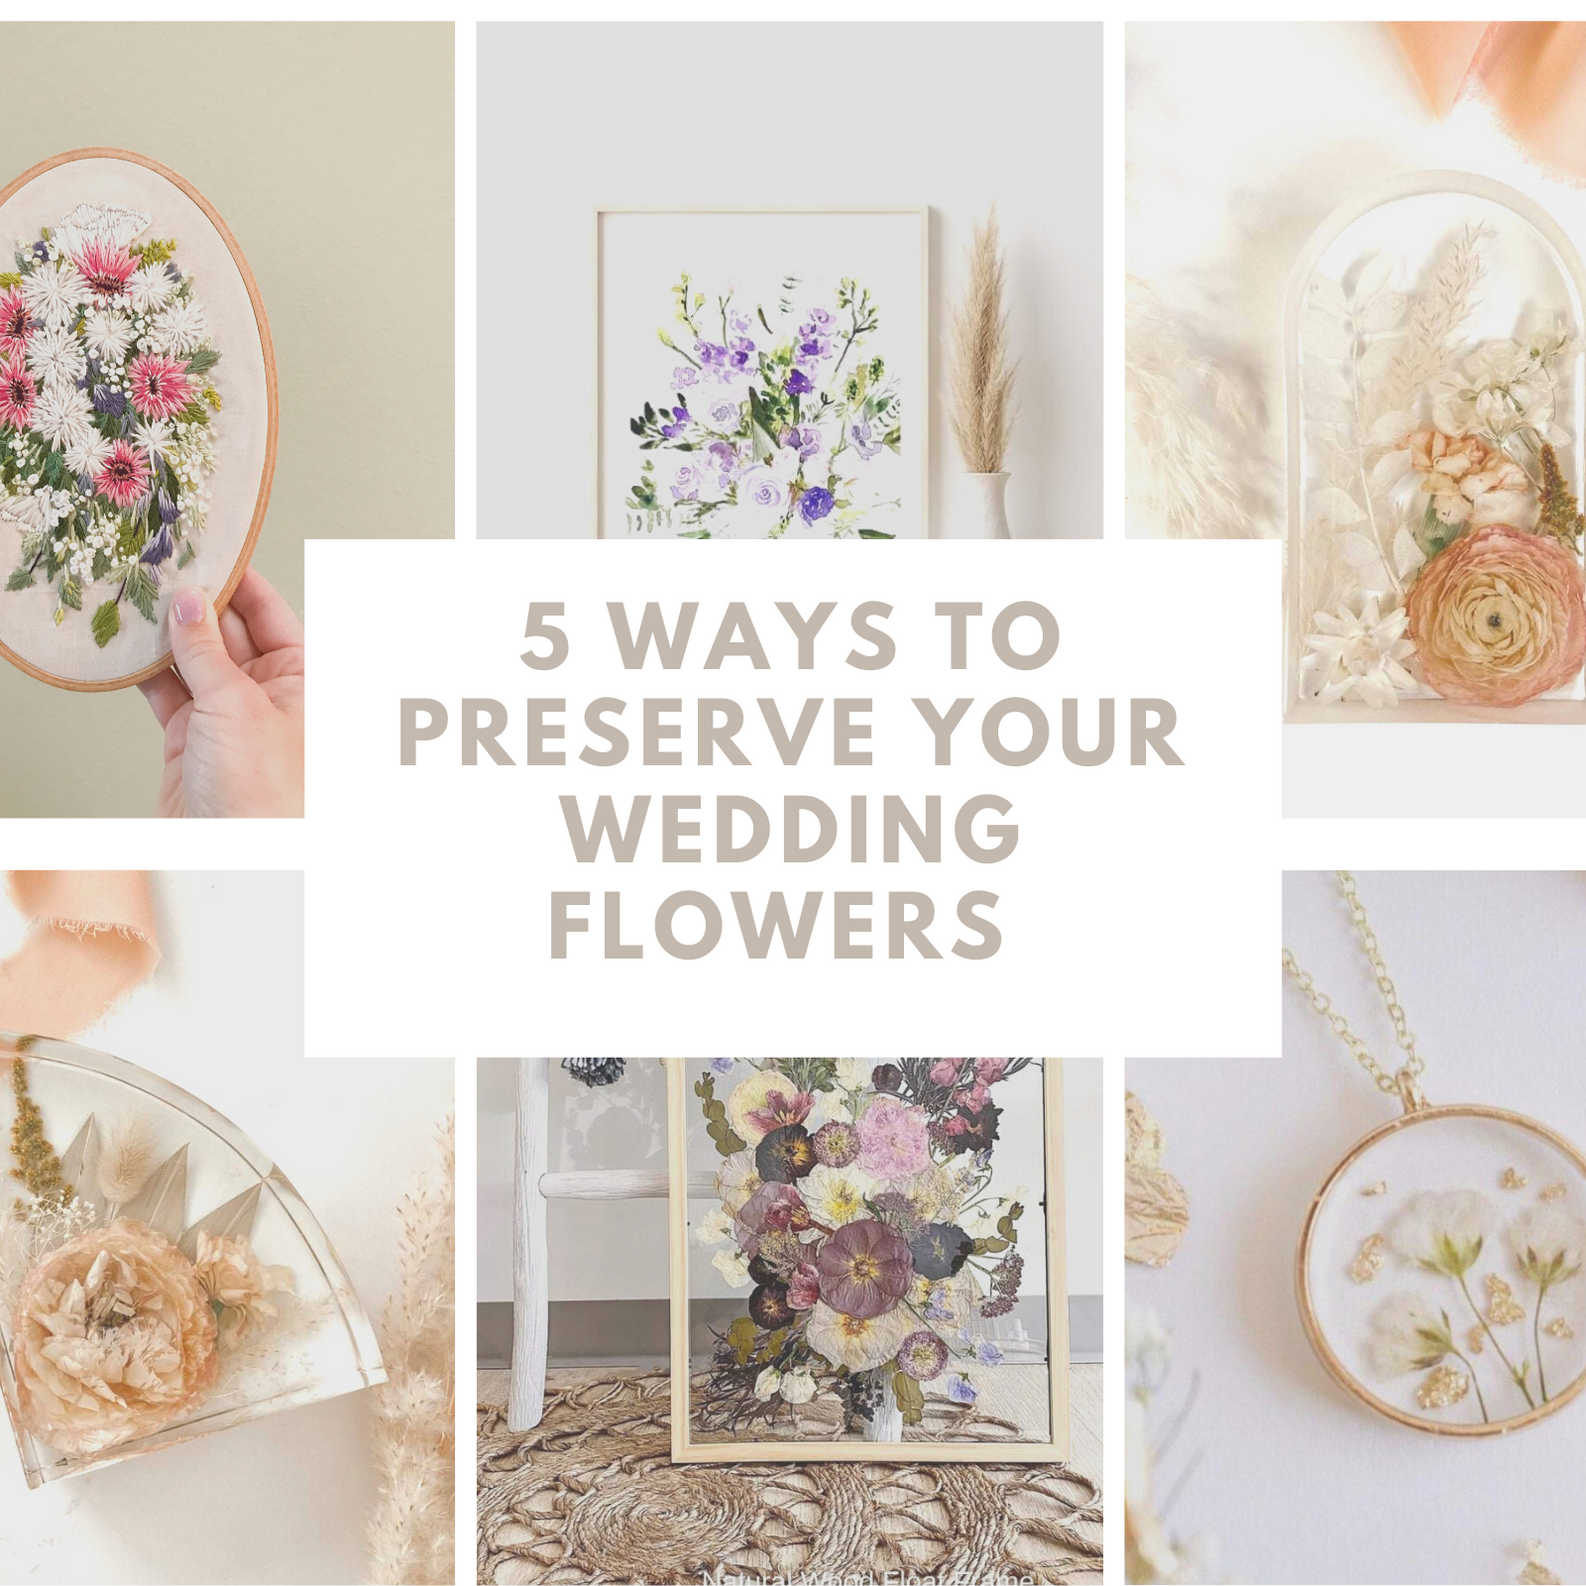 Cover Image for 5 ways to preserve your wedding flowers